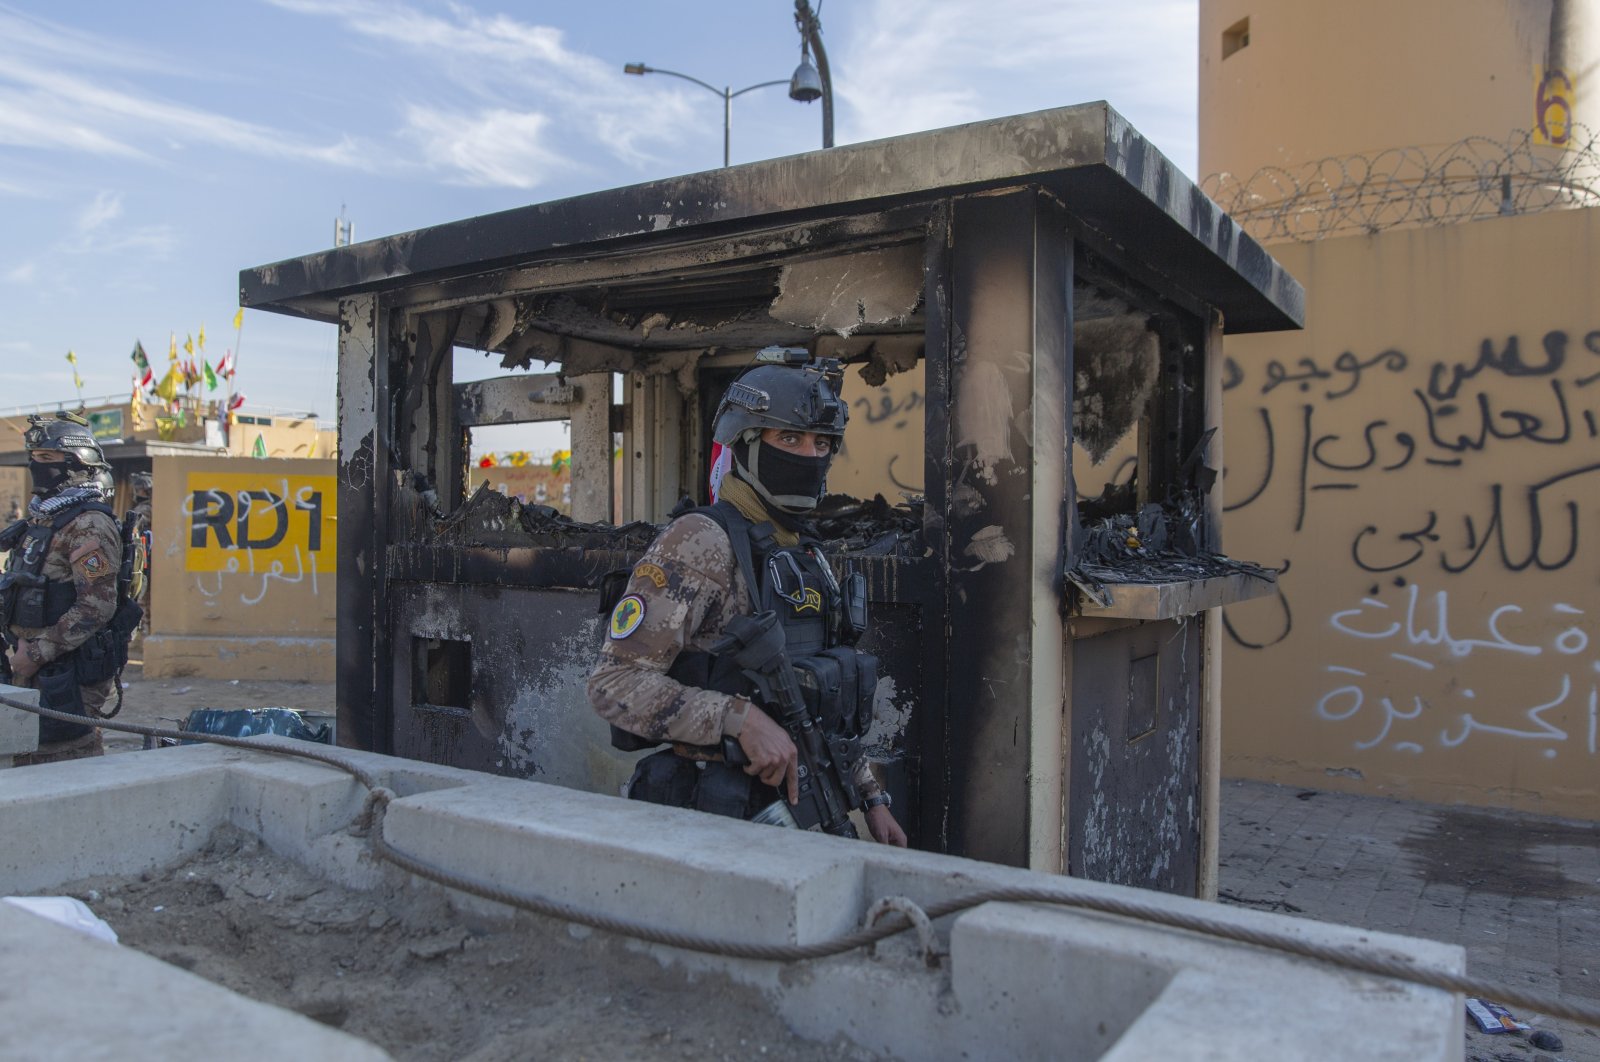 Iraqi army soldiers are deployed in front of the U.S. embassy, in Baghdad, Iraq, Jan. 1, 2020. (AP Photo)